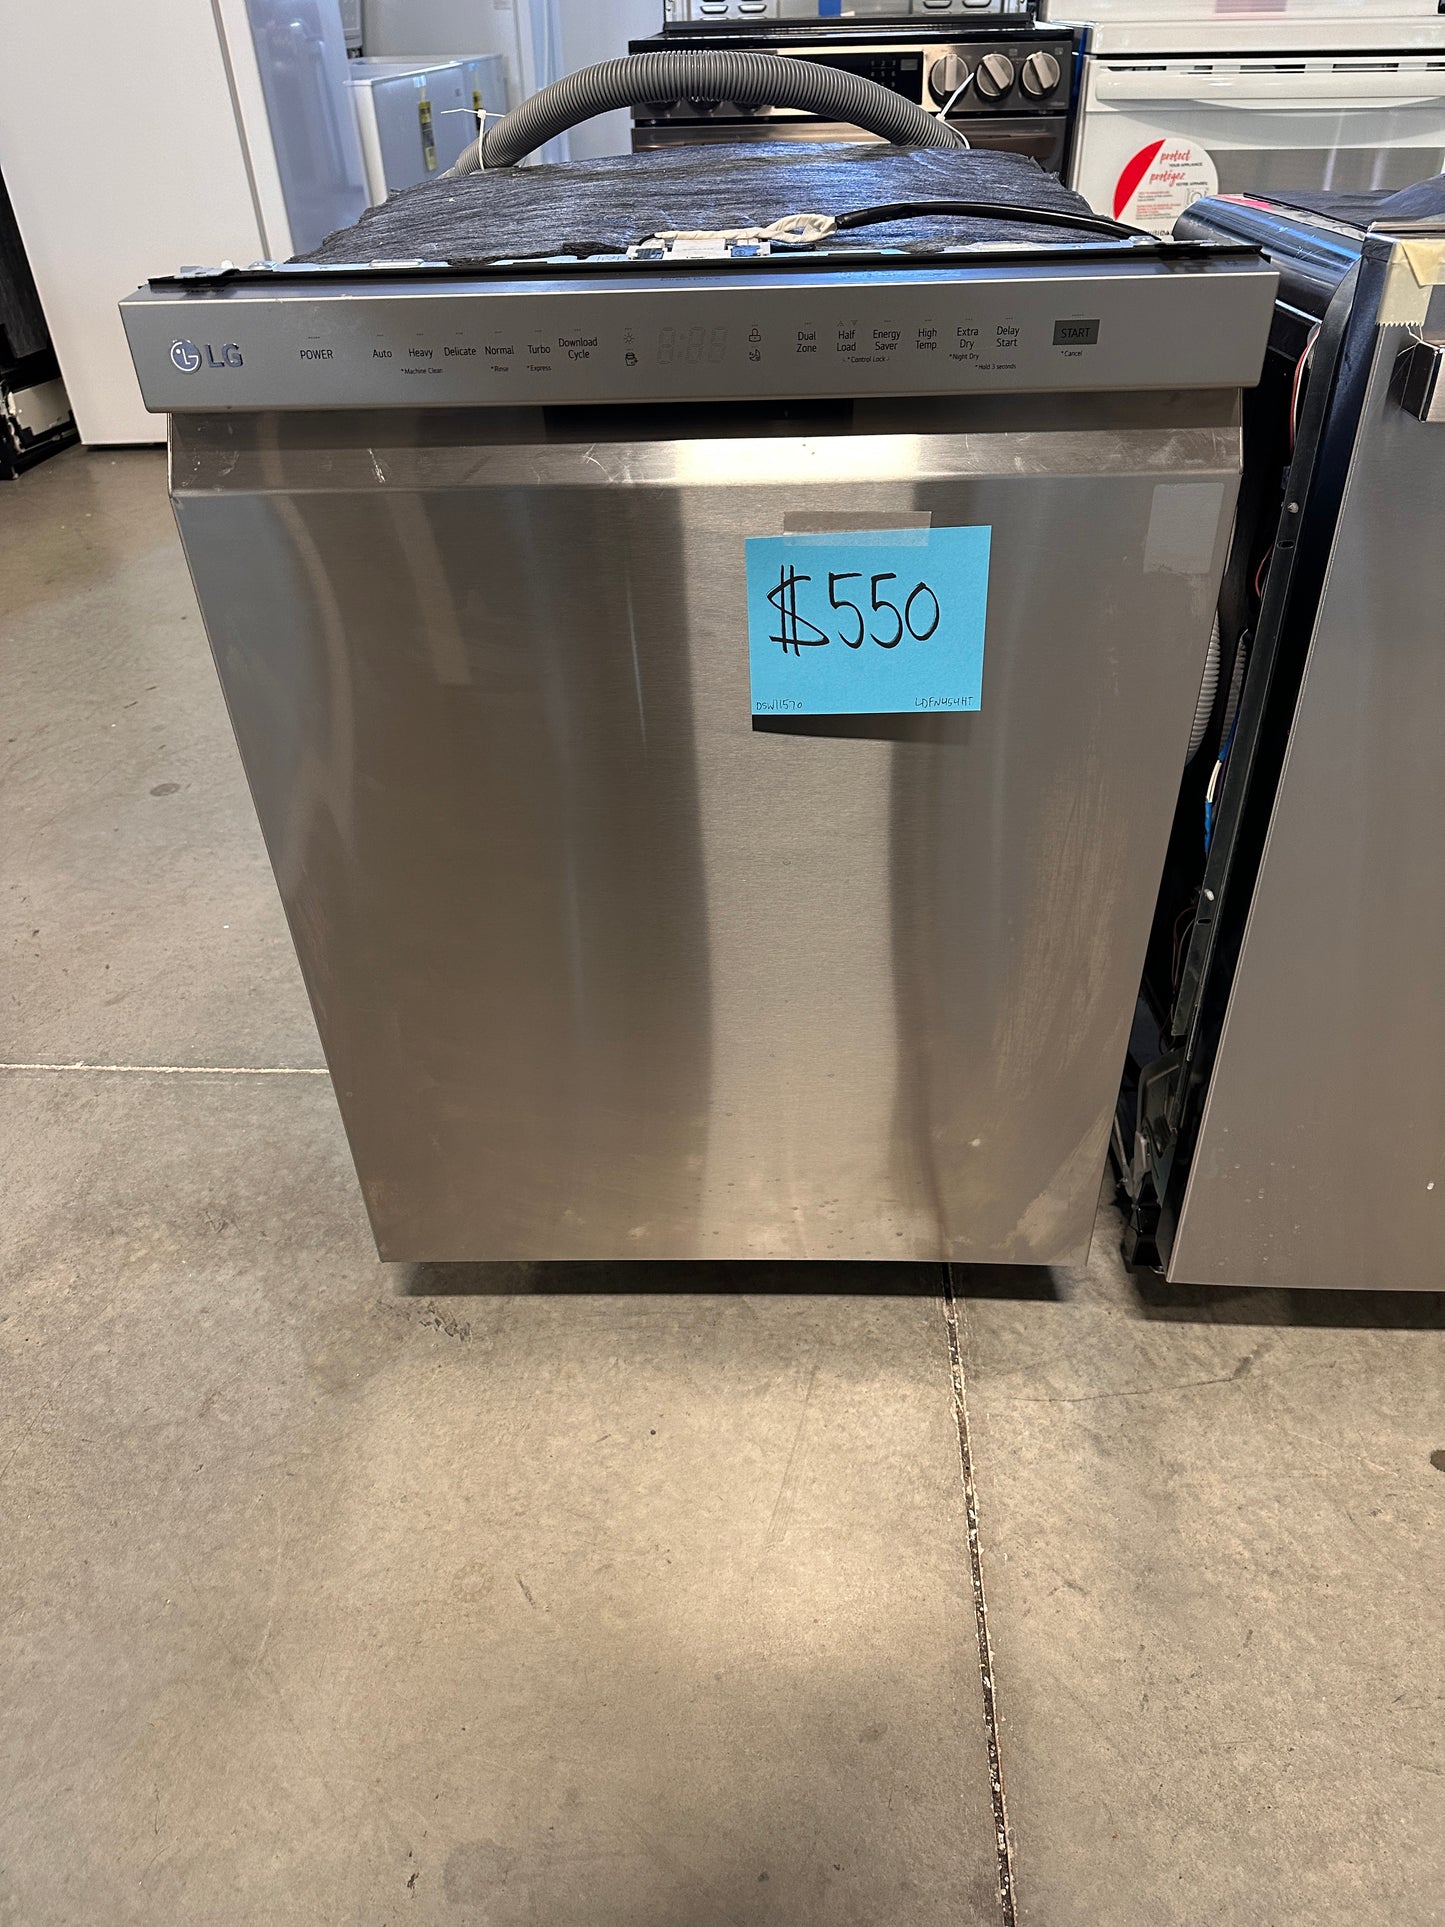 SMART LG STAINLESS STEEL TUB DISHWASHER with 3RD RACK - DSW11570